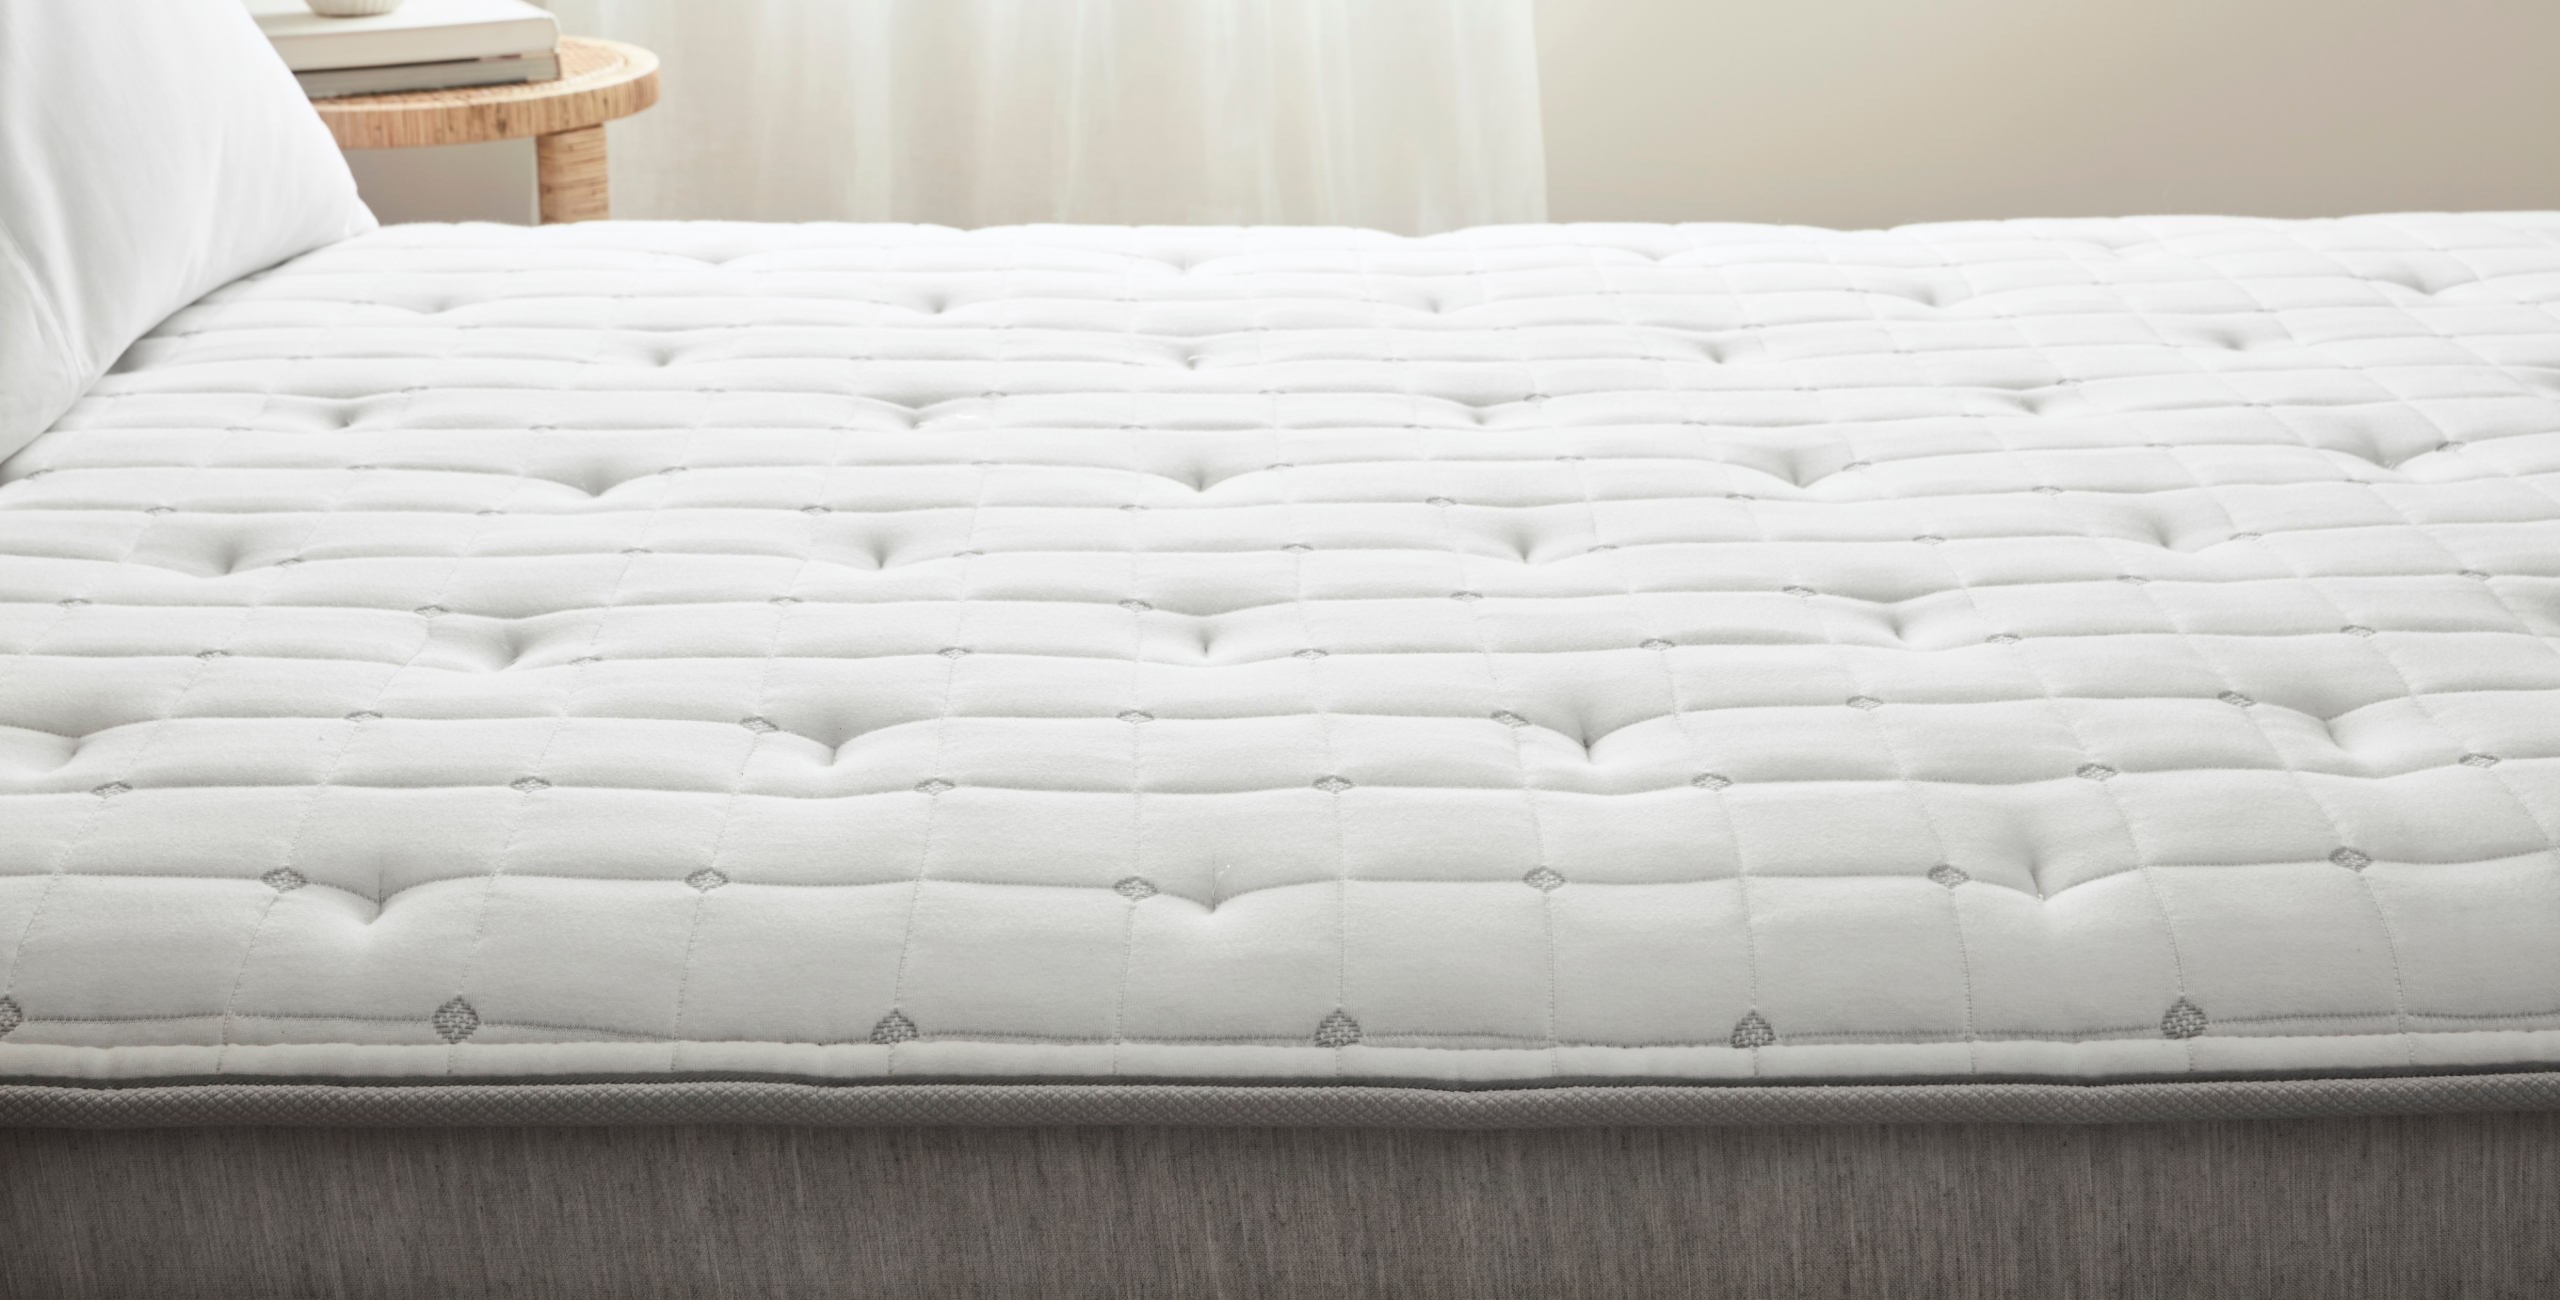 King bed size: exactly how big is a king size mattress?